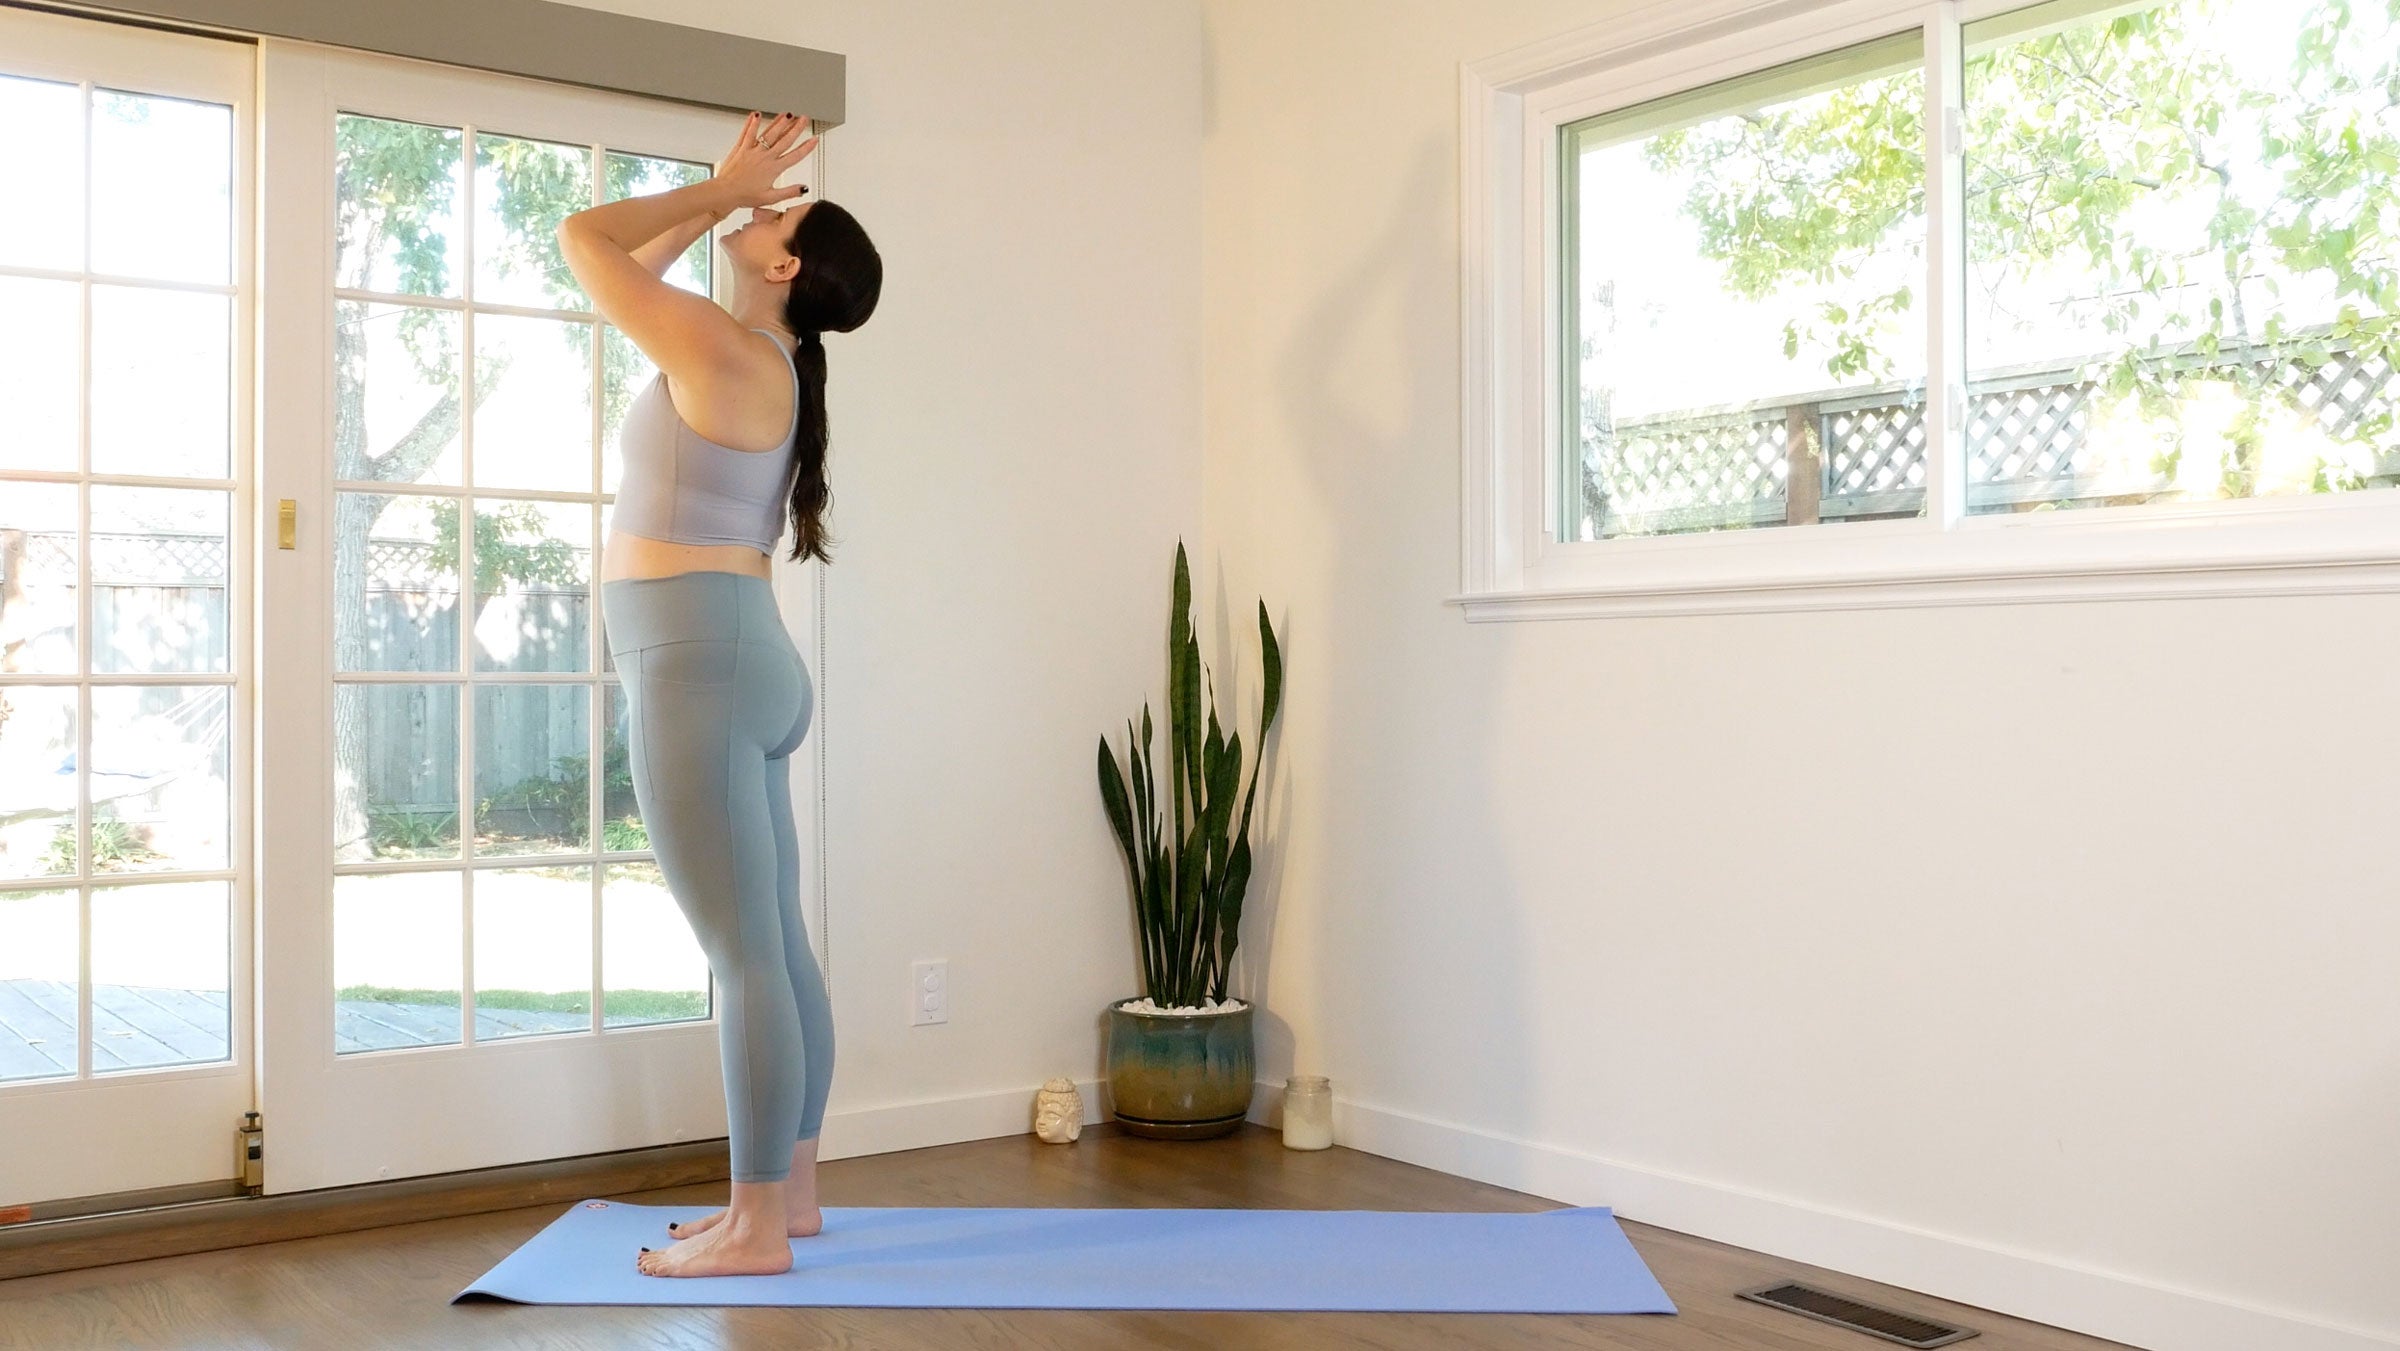 Wrist and Hand Free Yoga for More Energy: 30 minute flow 